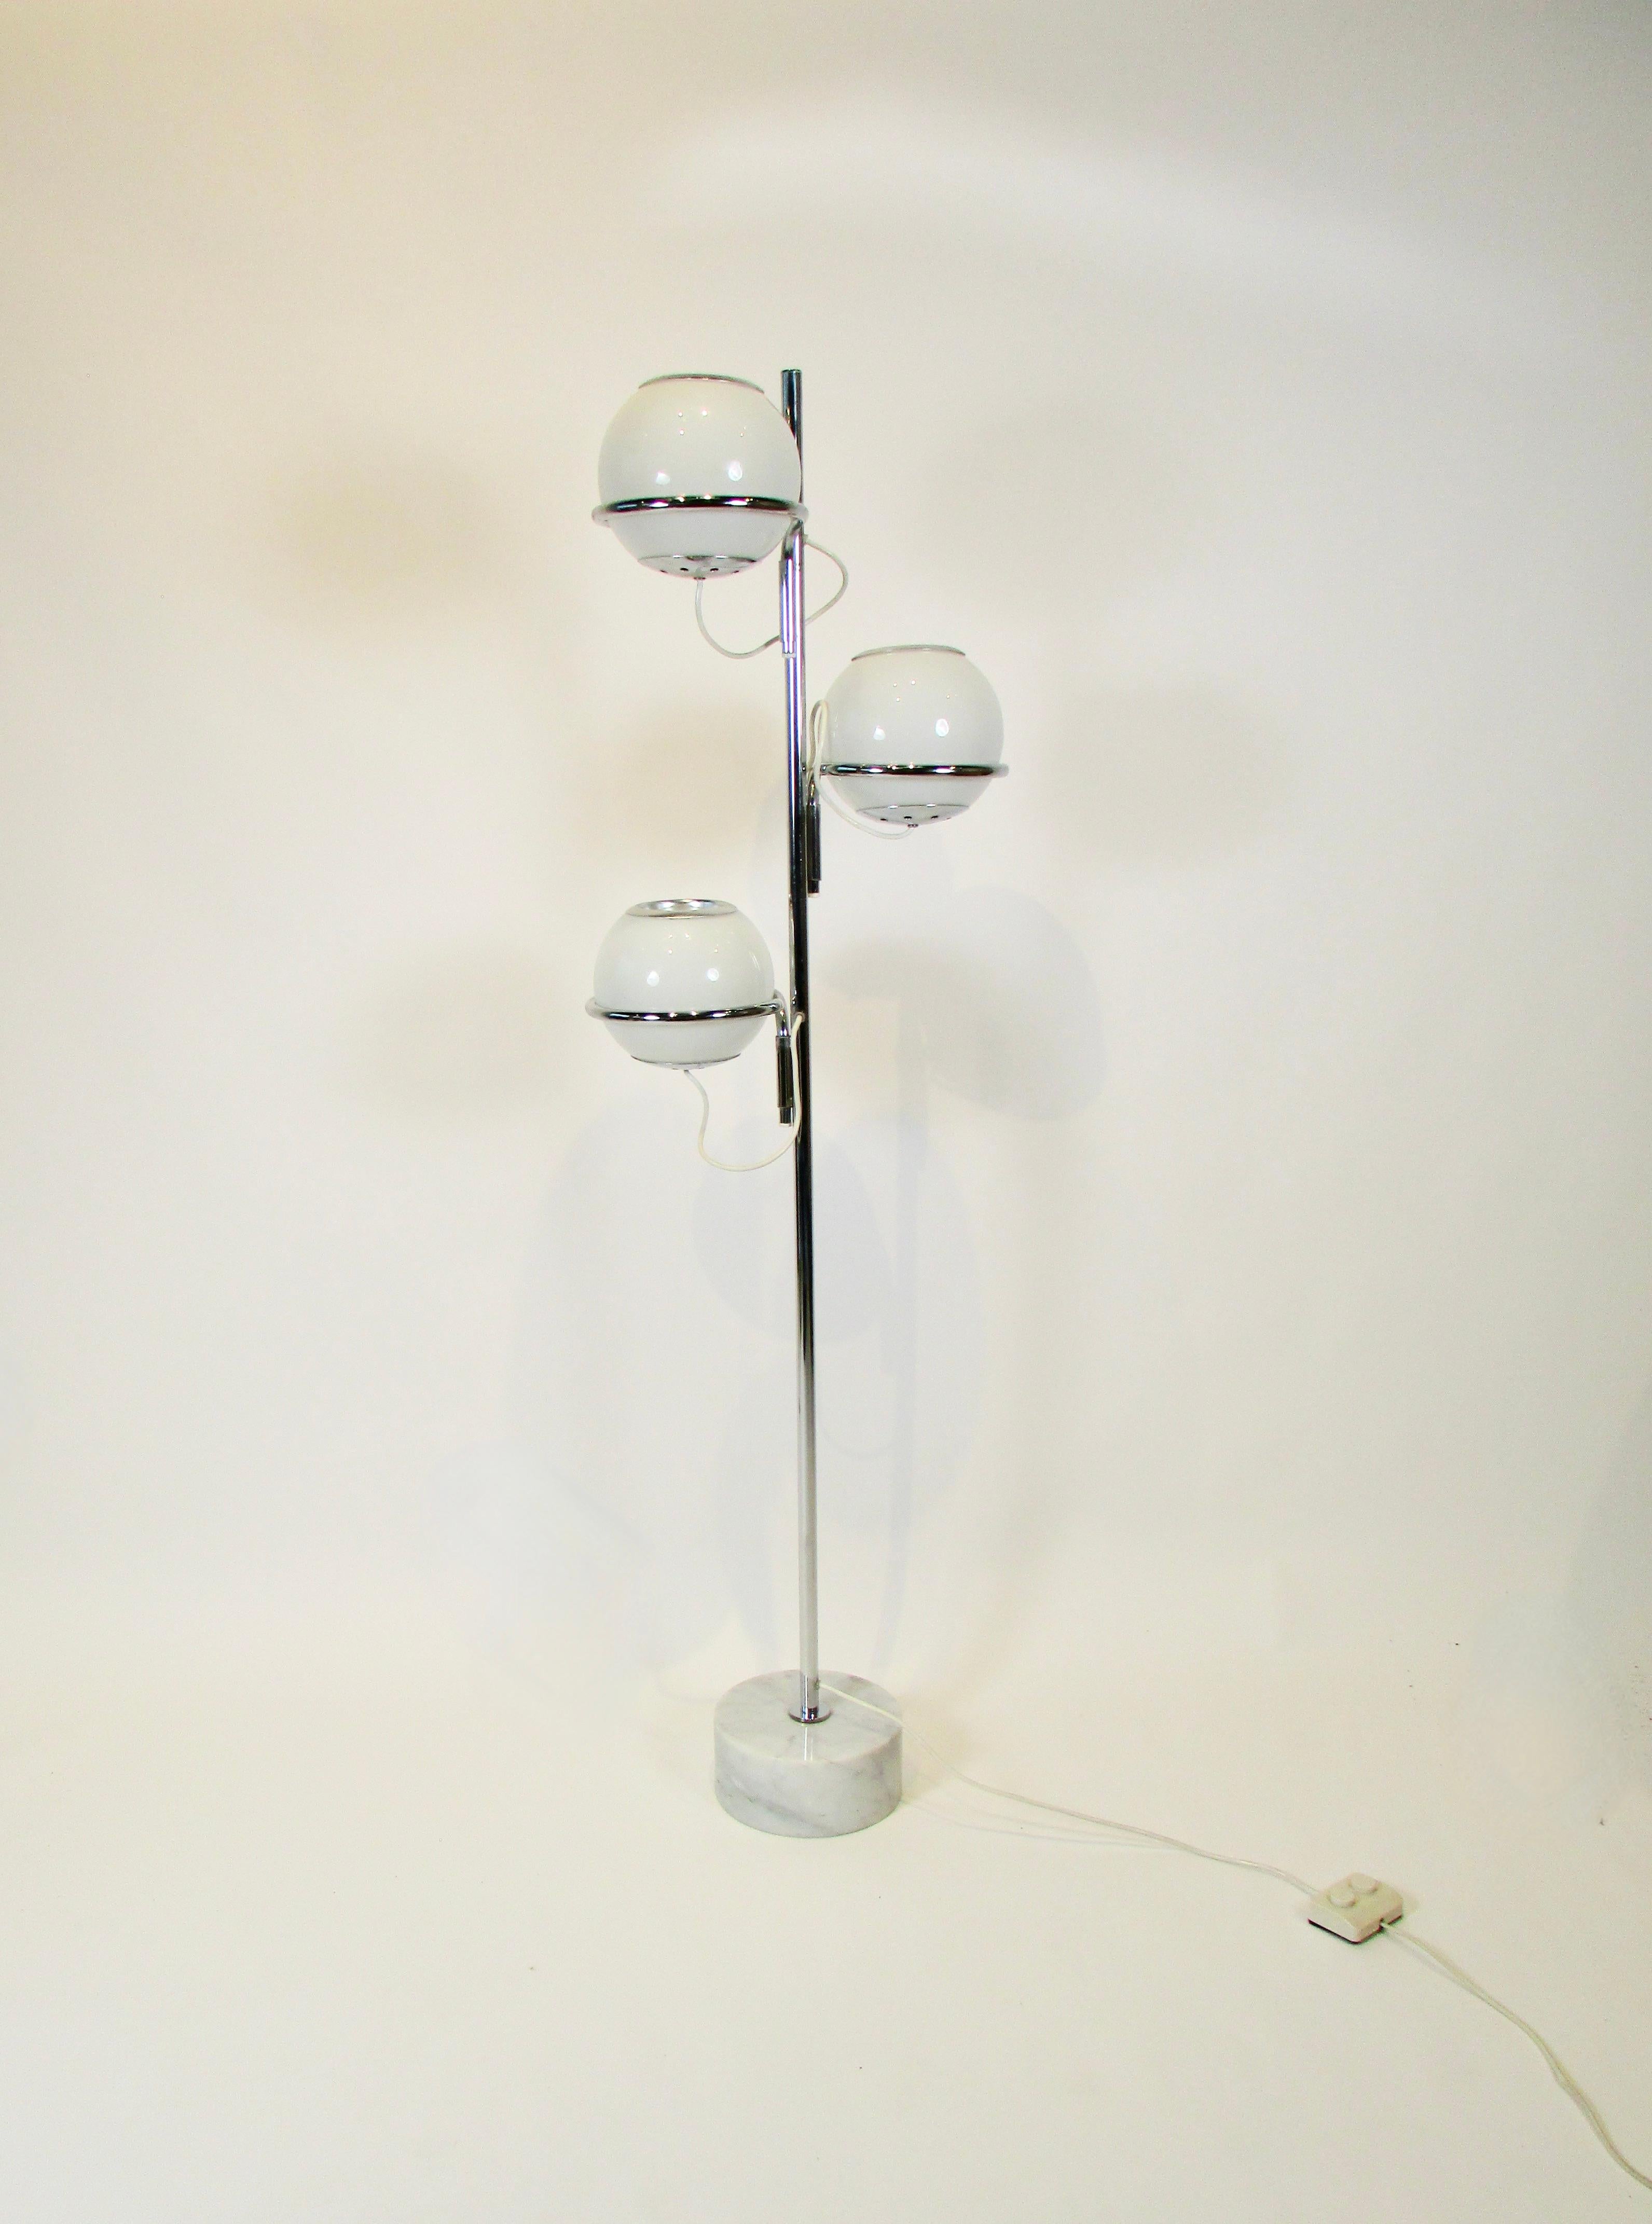 Multi adjustable floor lamp designed by Gino Sarfatti for Arteluce Italy . Three globes which rotate in every direction mounted in swivel lasso brackets on chrome shaft  attached to 4